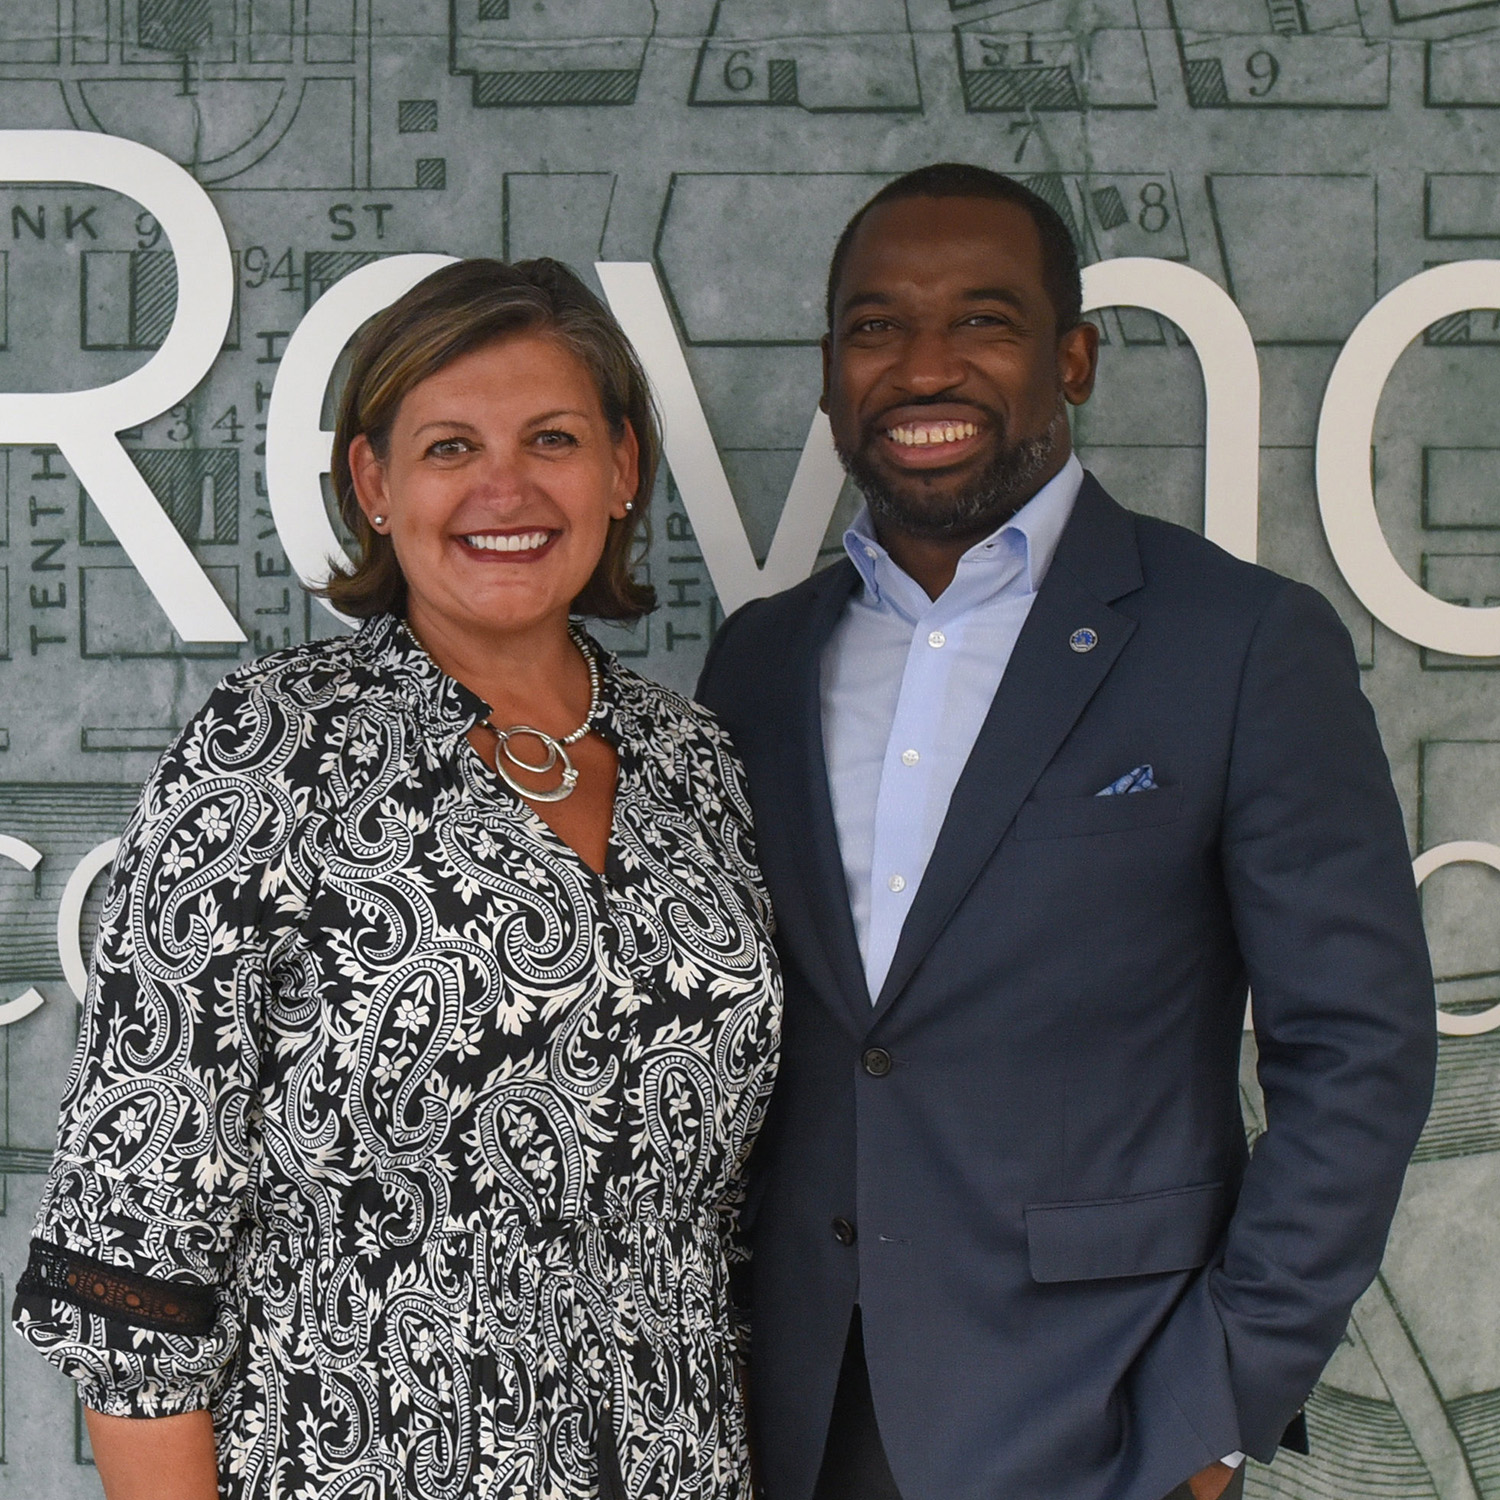 Reynolds Announces New Partnership with City of Richmond